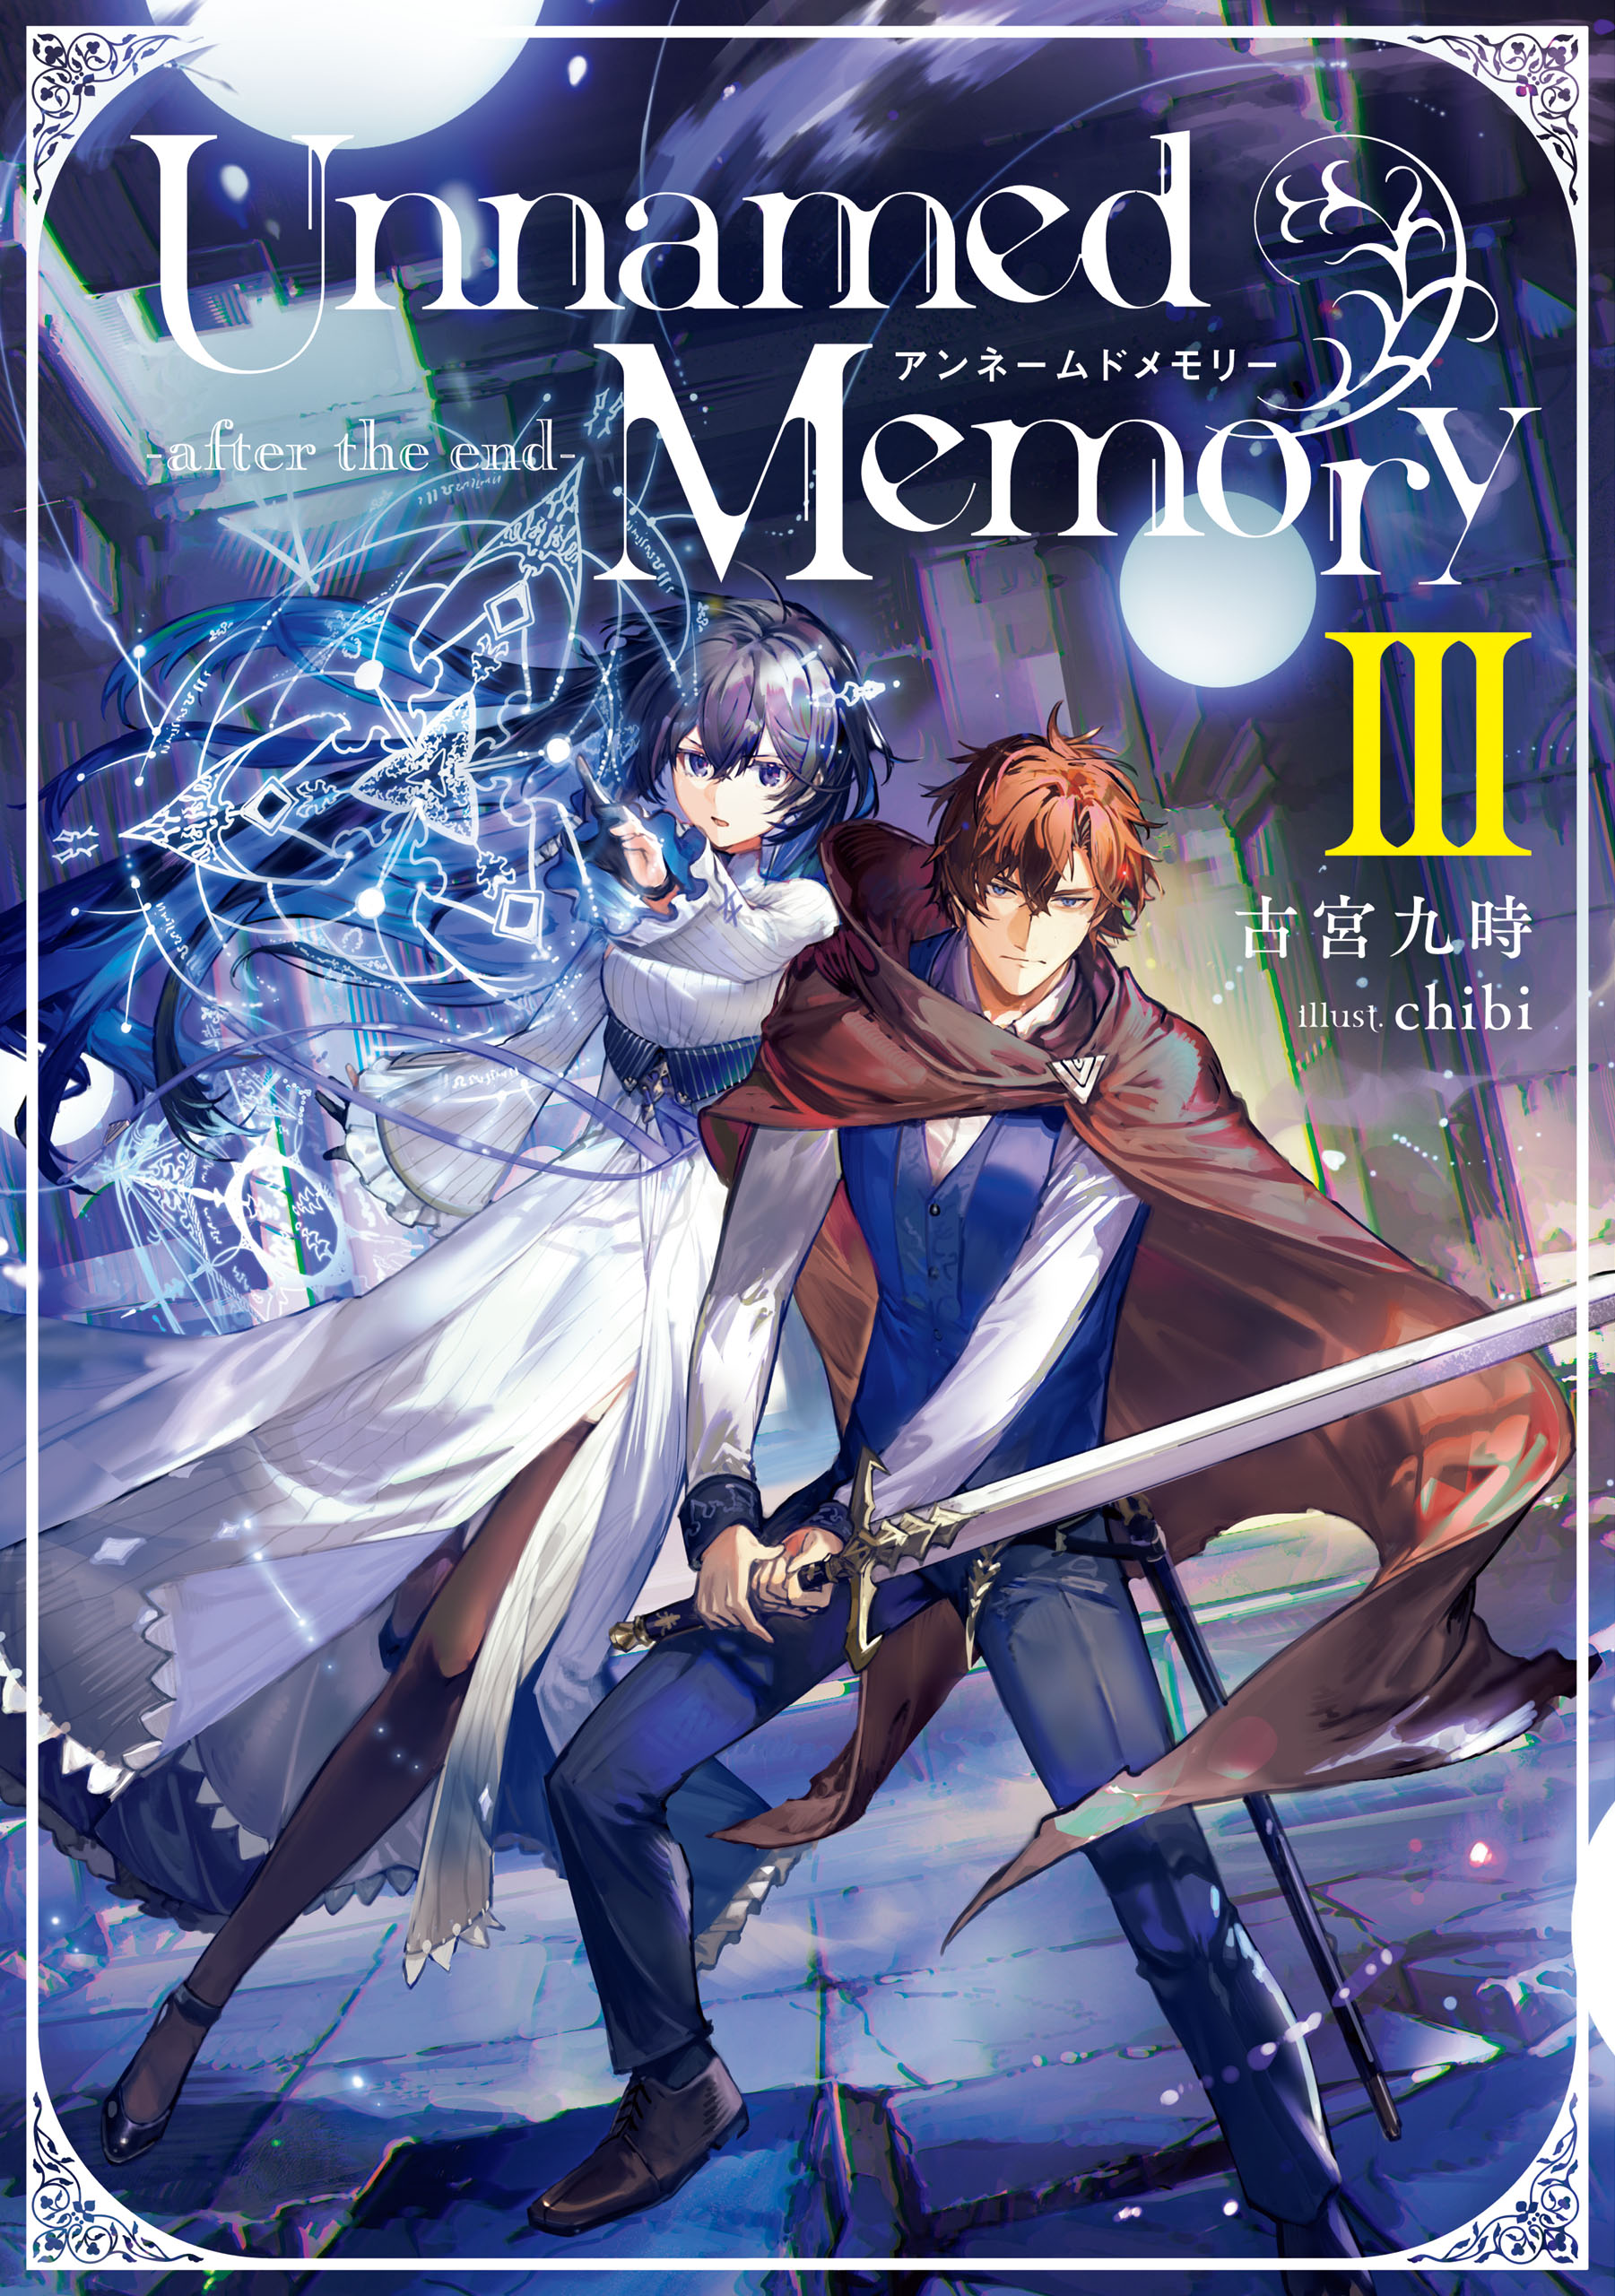 Unnamed Memory 全巻+after the end 全巻+Babel-